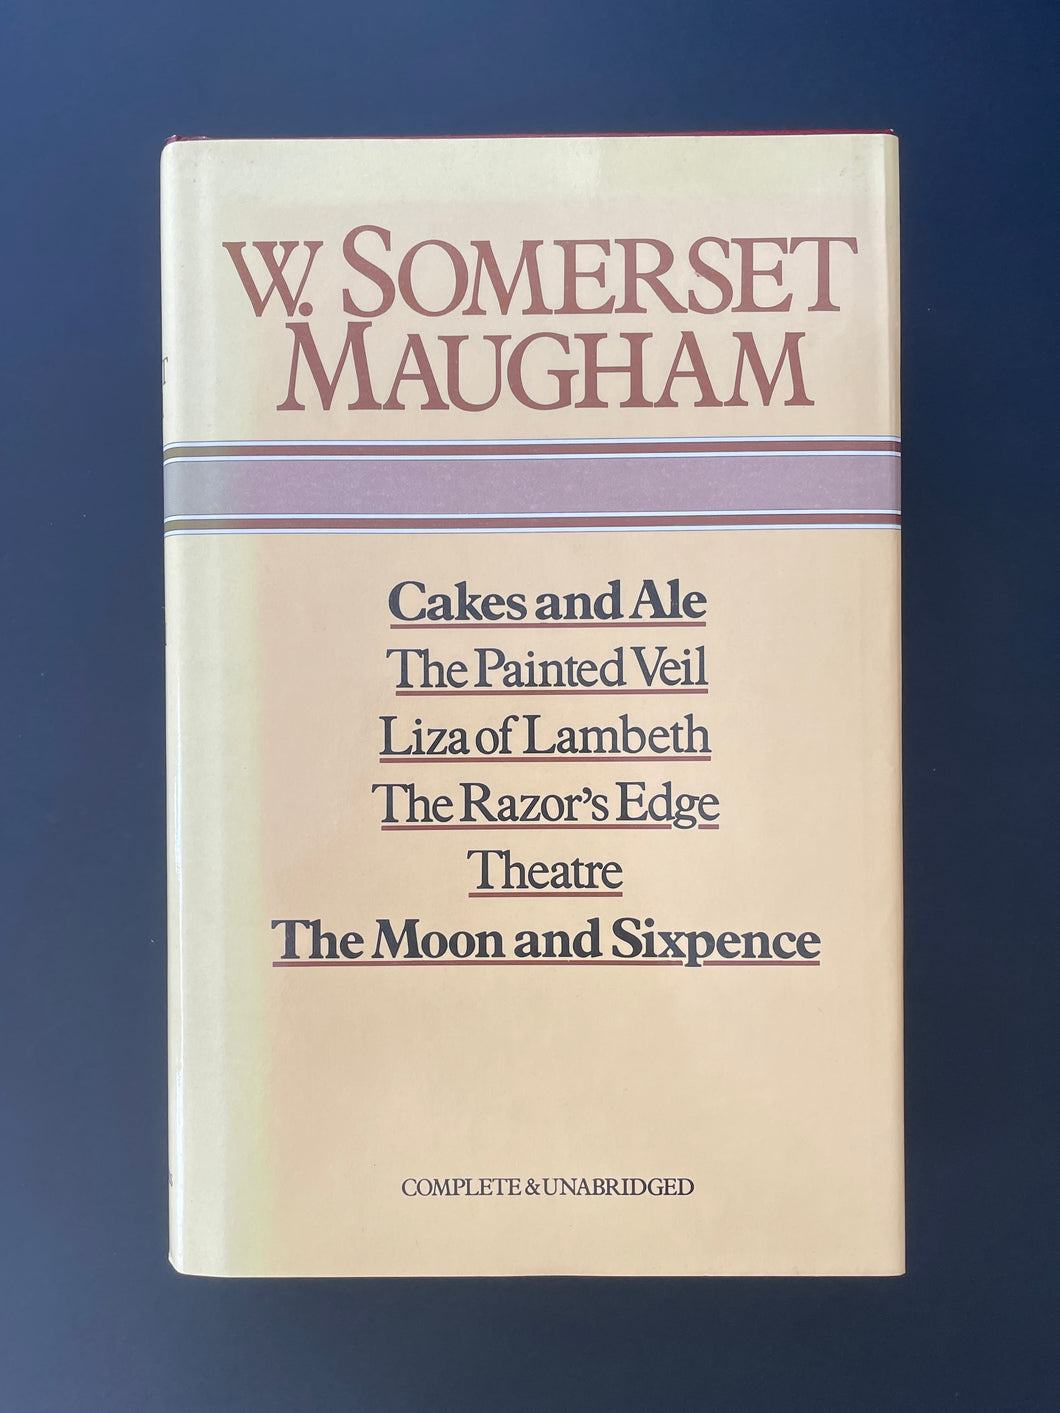 The Selected Novels of W. Somerset Maugham: photo of the front cover which shows very minor scuff marks along the edges of the dust jacket.